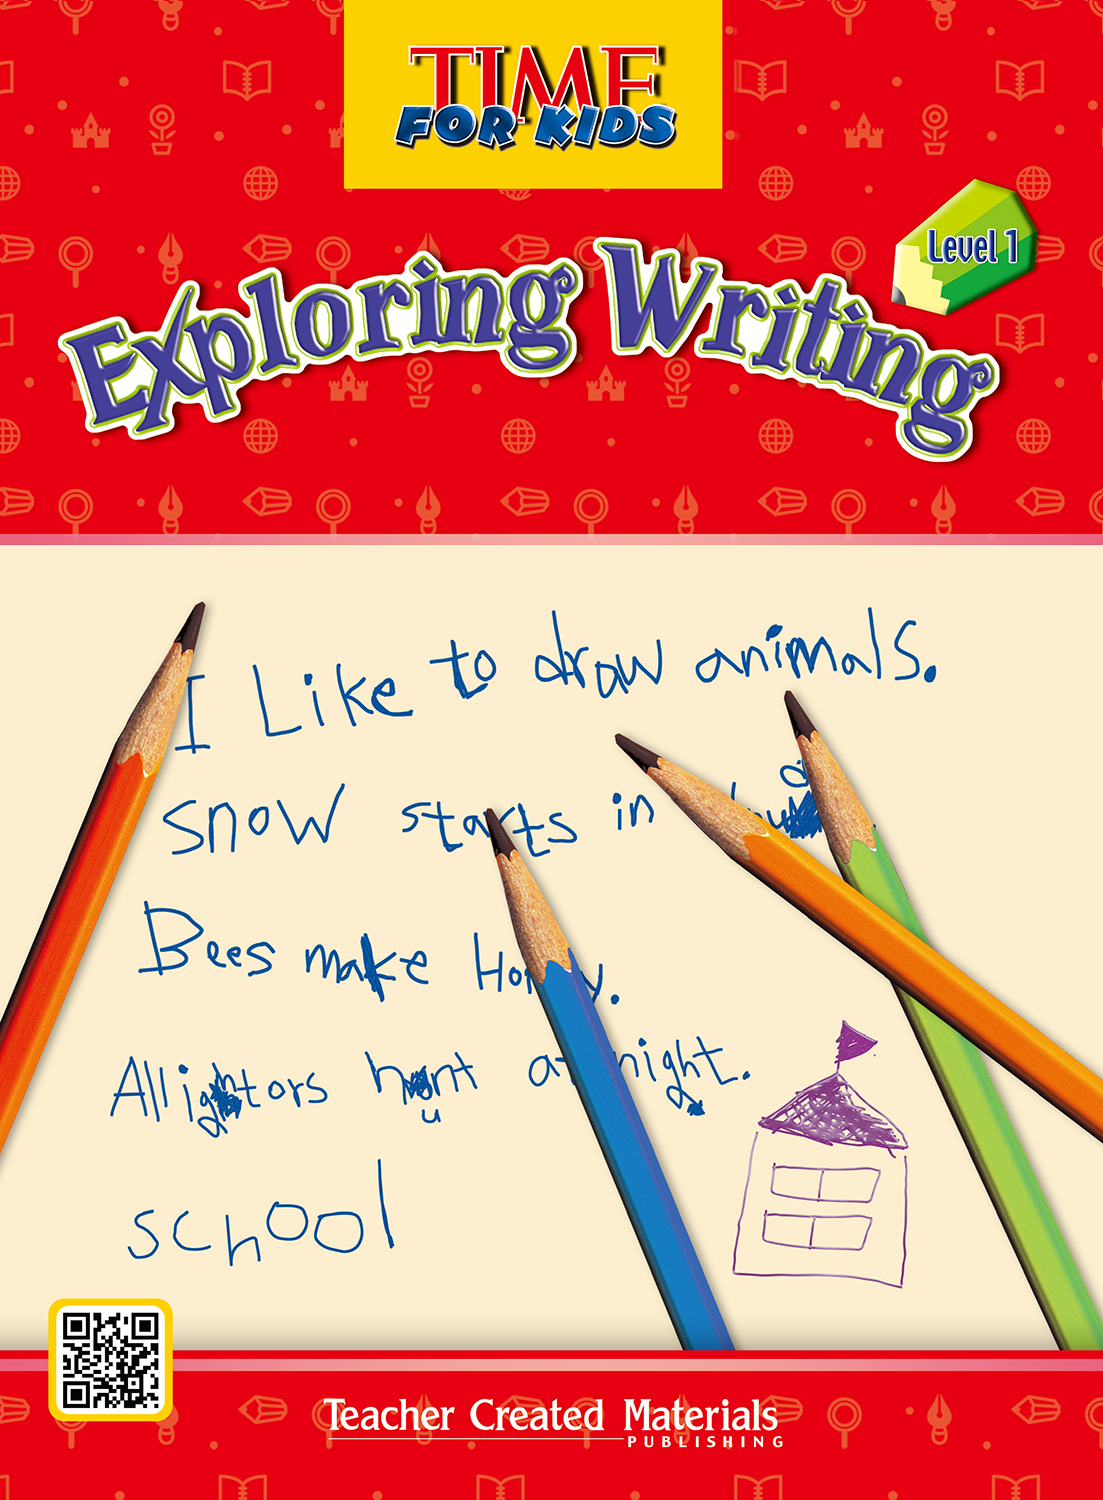 Time for Kids: Exploring Writing 1 with App